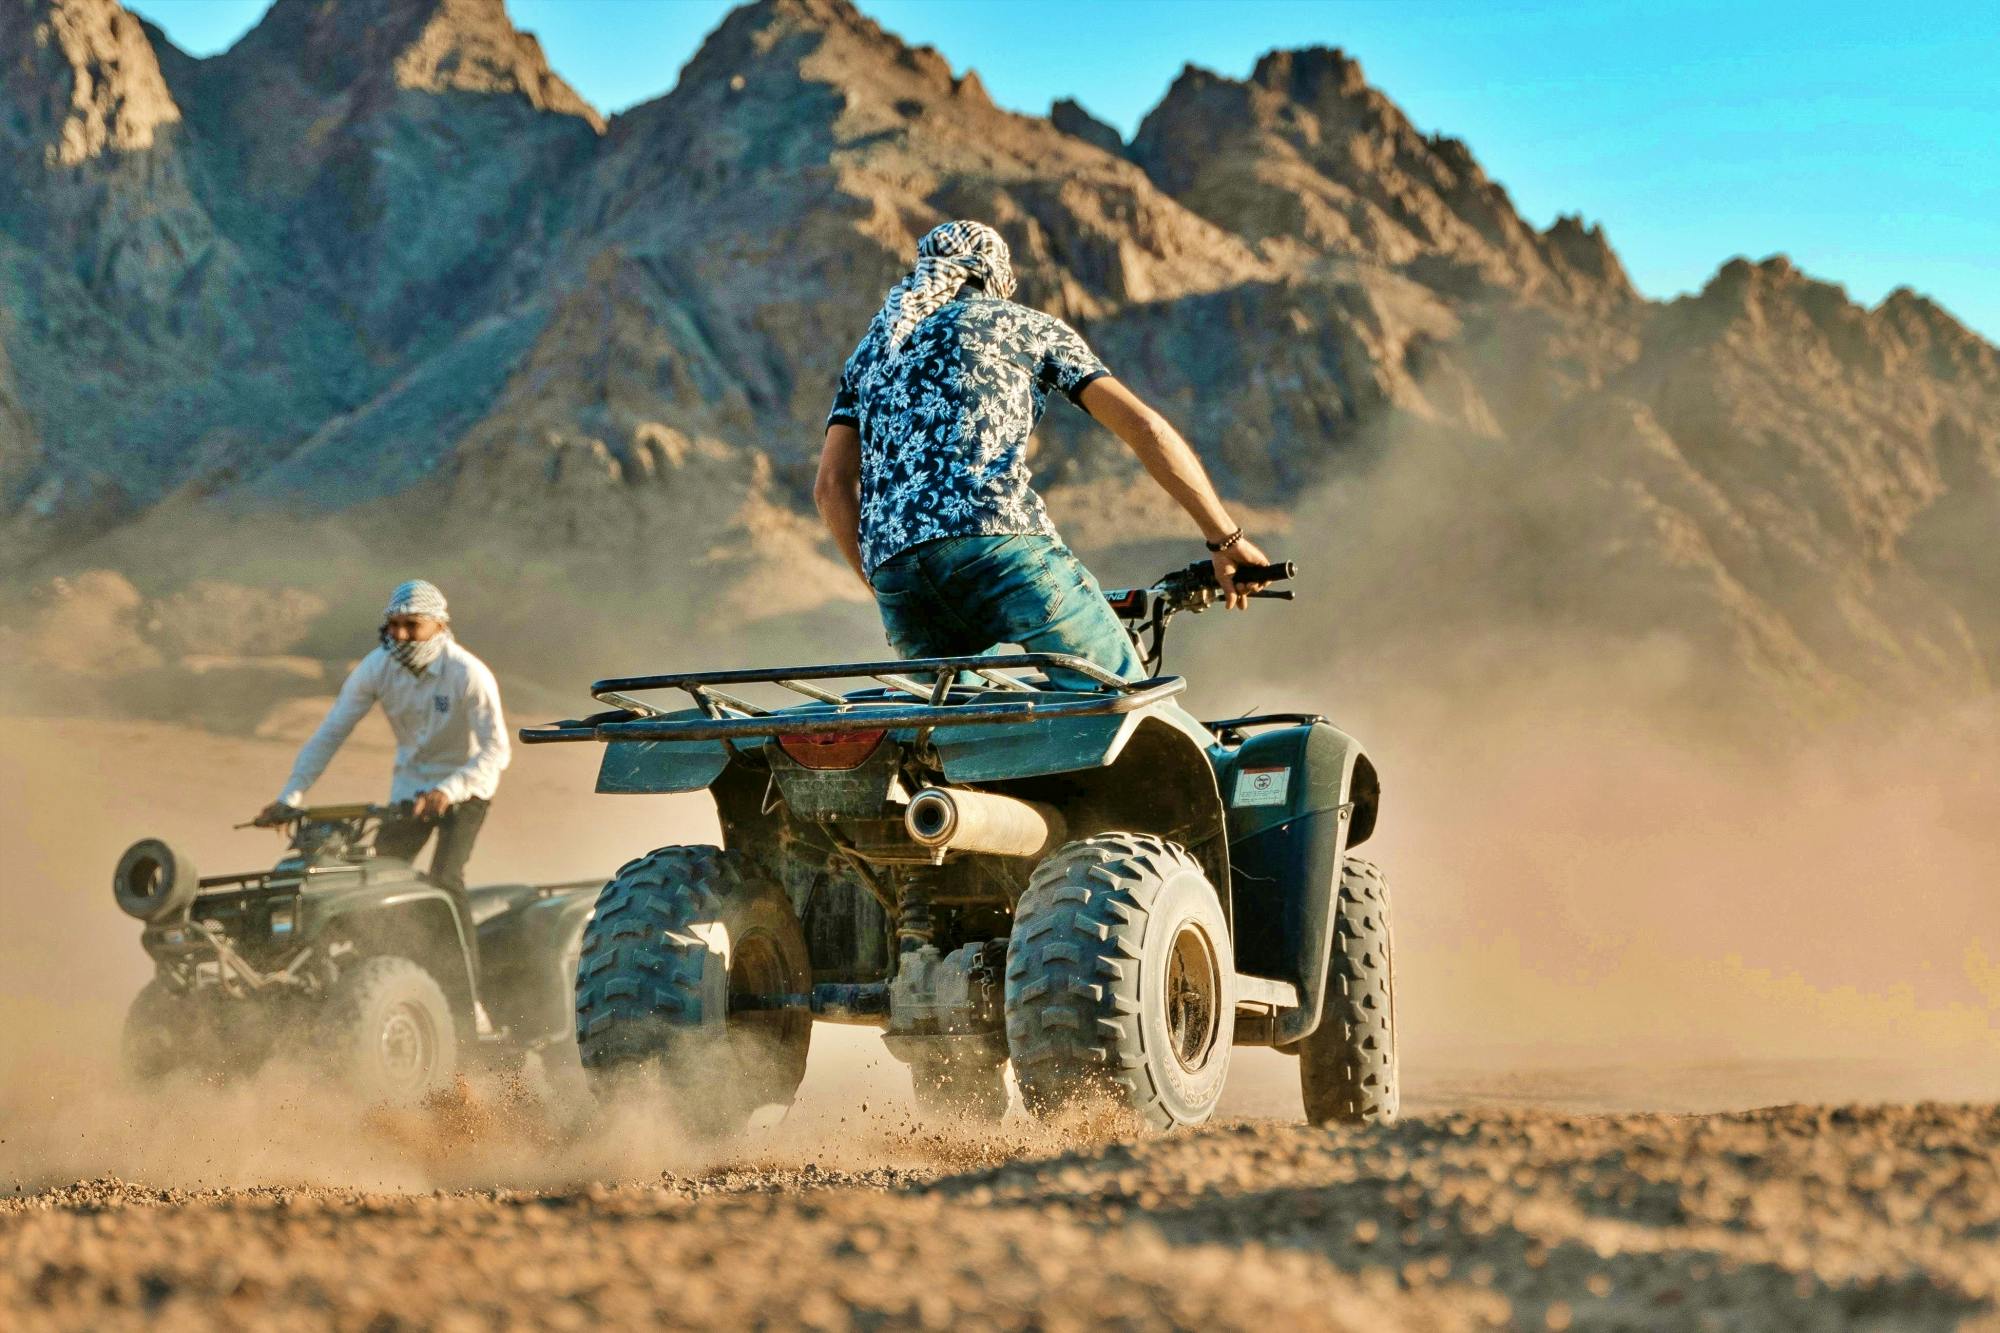 Quad experience in the Sahara with dinner from Sharm El Sheikh Musement